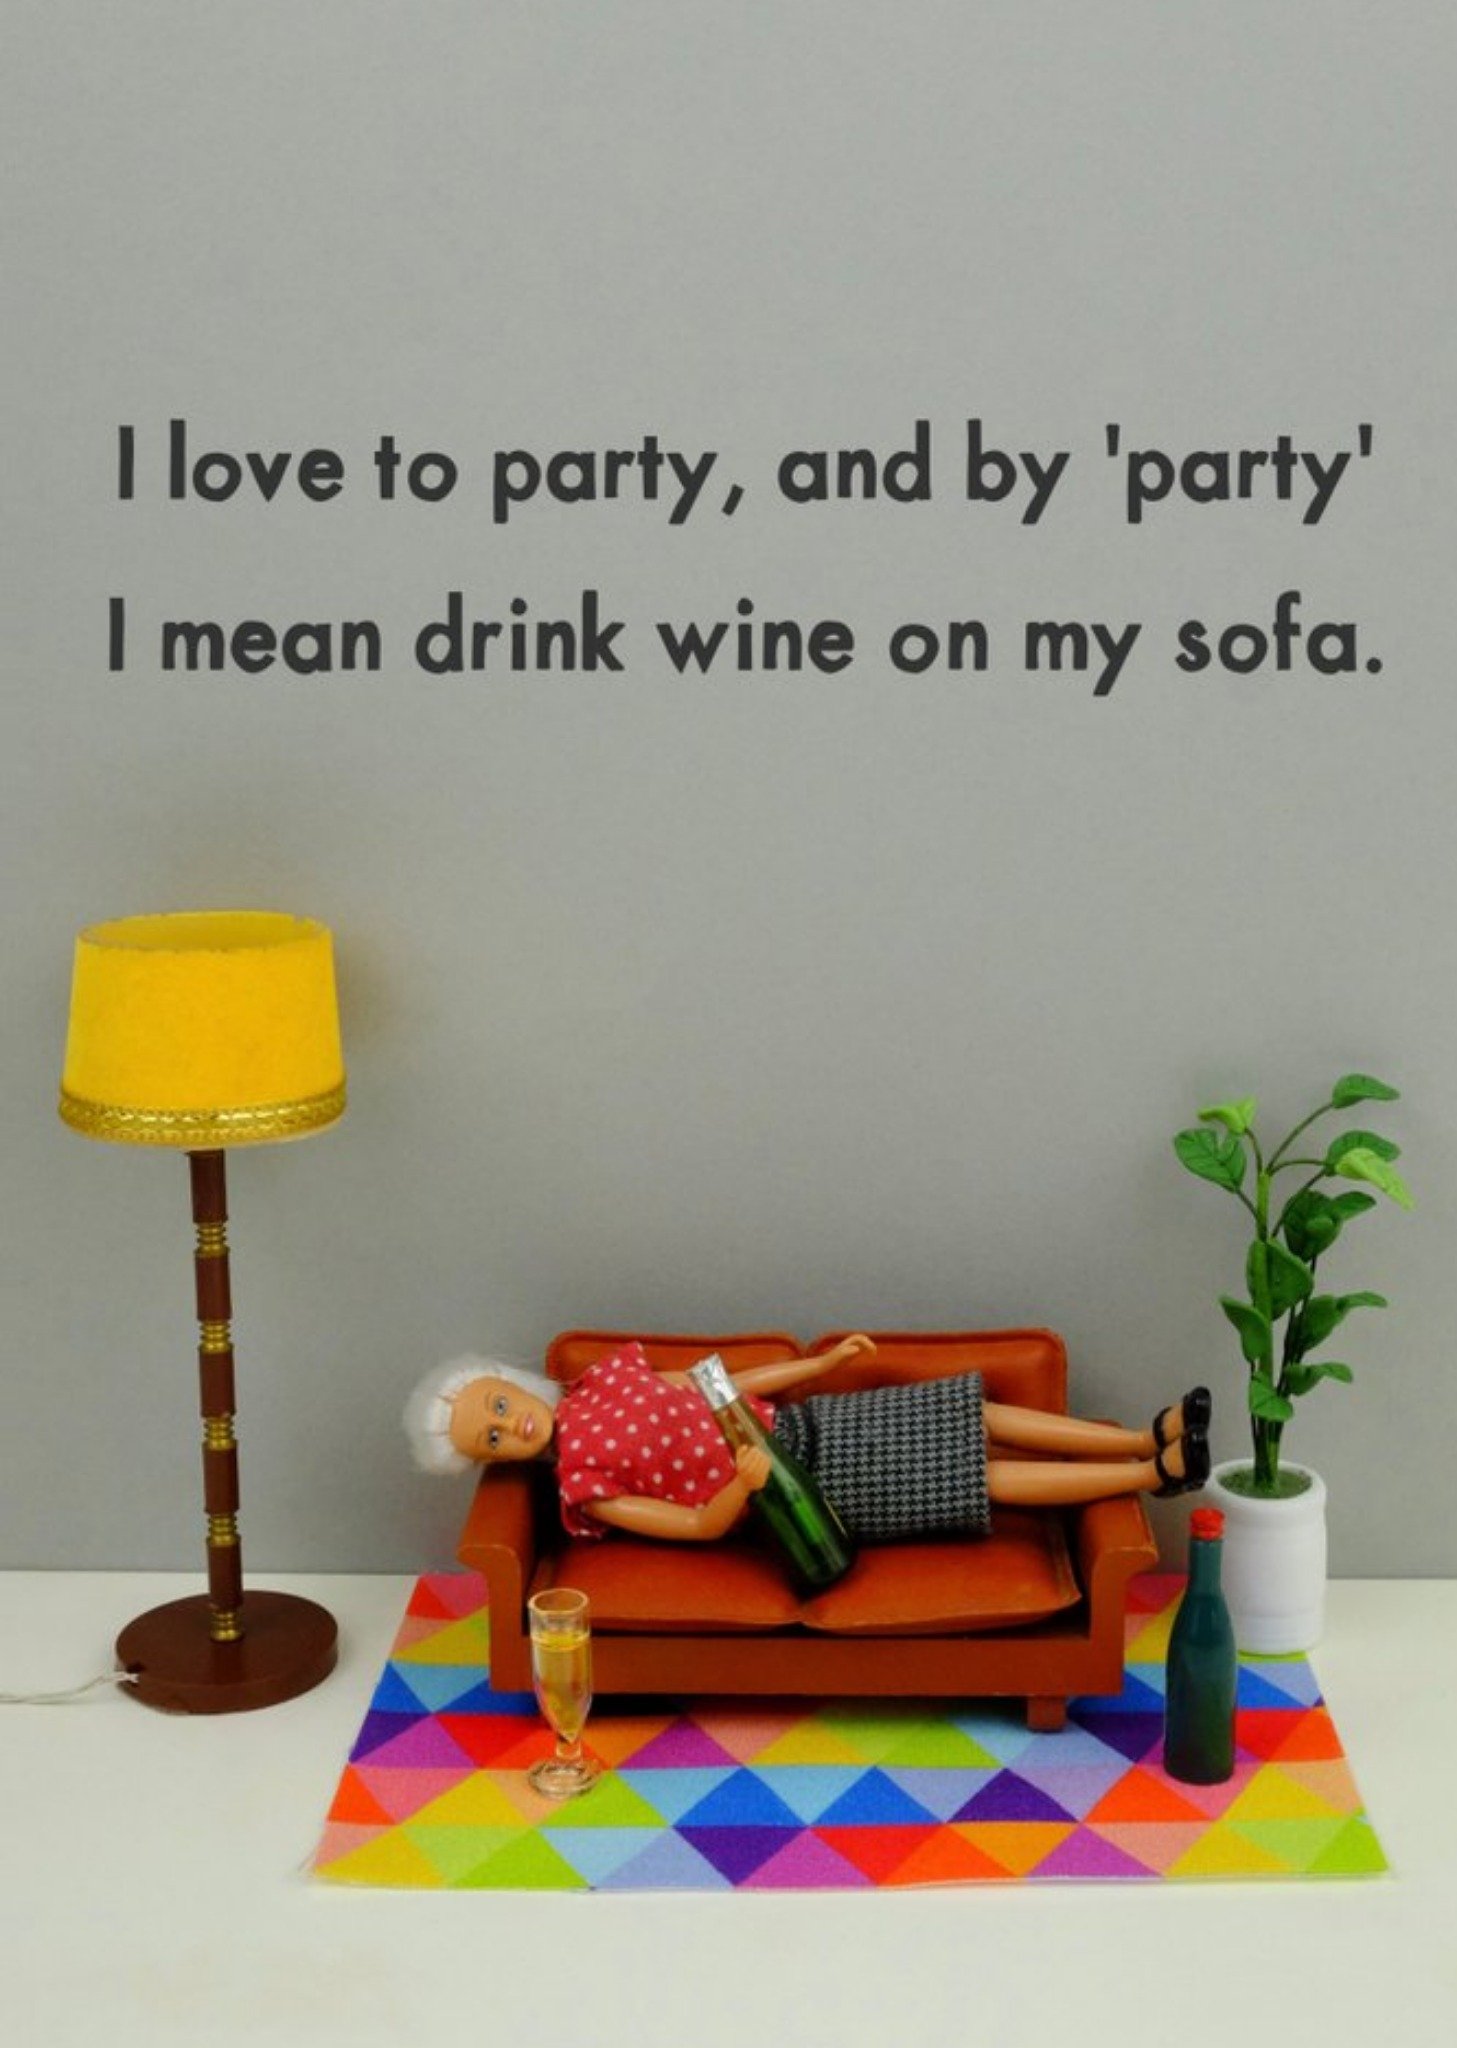 Friends Bold And Bright Adult Funny Party Photo Image Wine Birthdays Card , Large